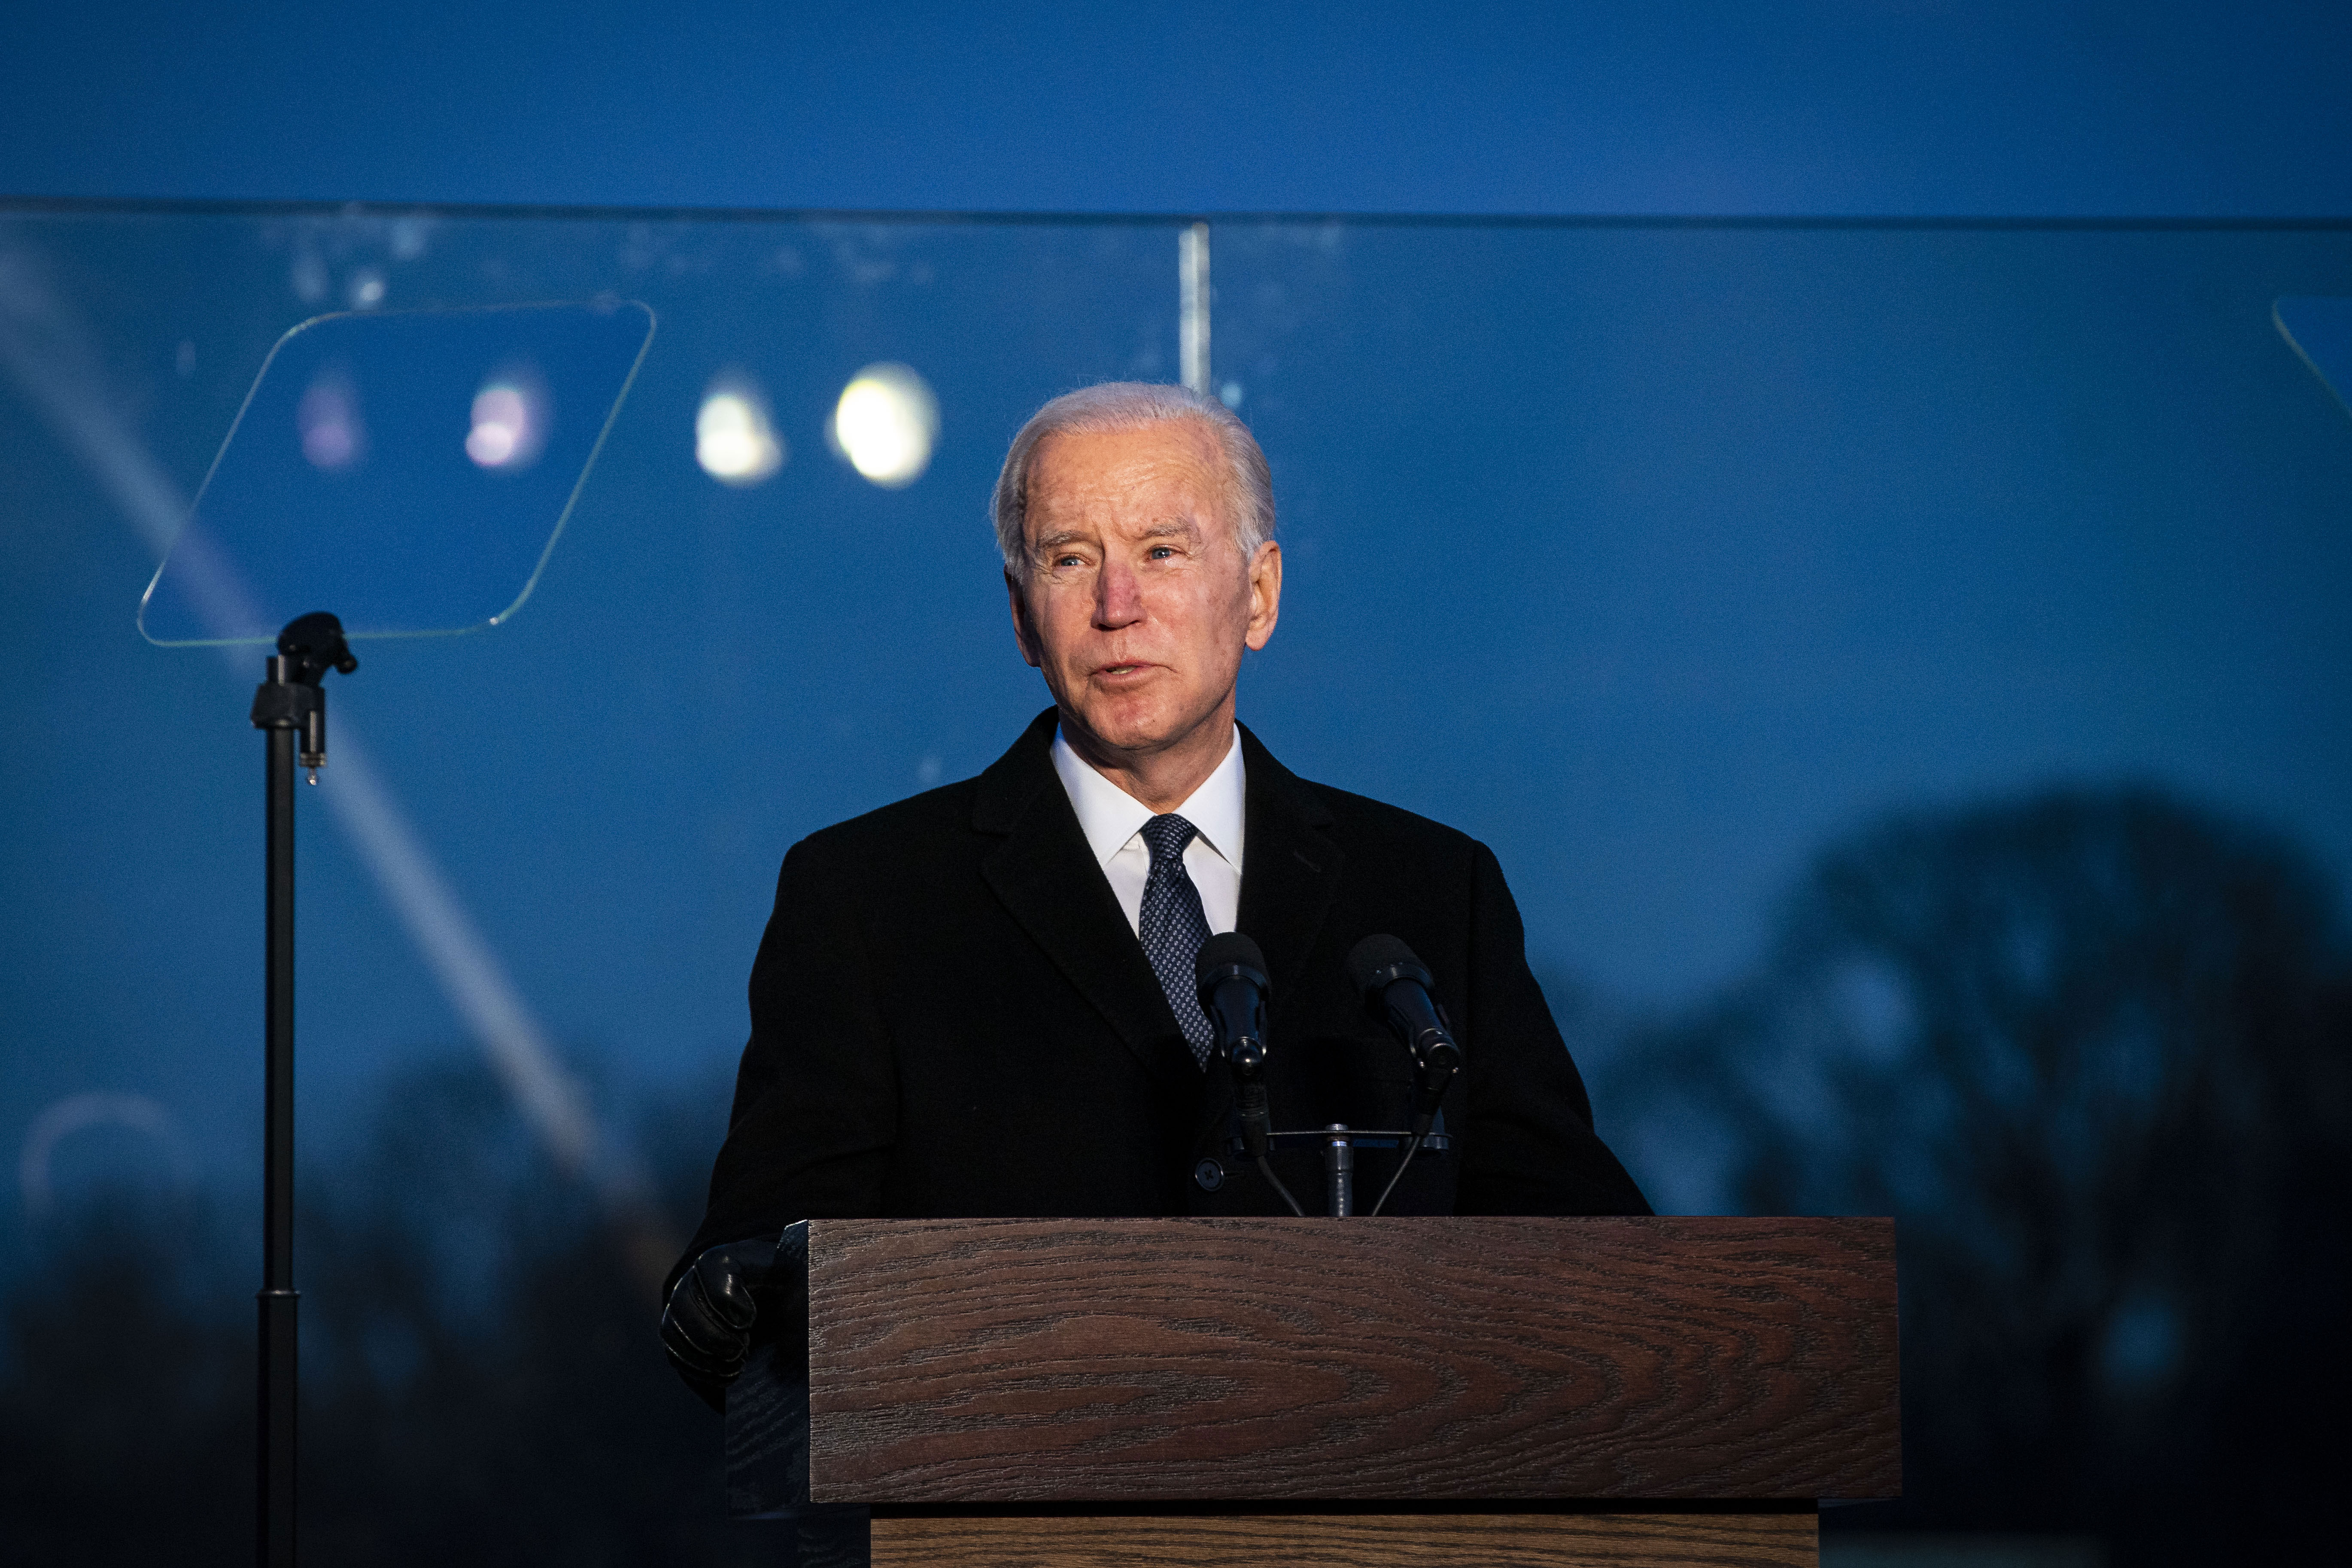 President-elect Joe Biden speaks at the Lincoln Memorial Reflecting Pool in Washington, DC, on January 19. The Covid-19 memorial paid tribute to Americans who have died because of the pandemic.